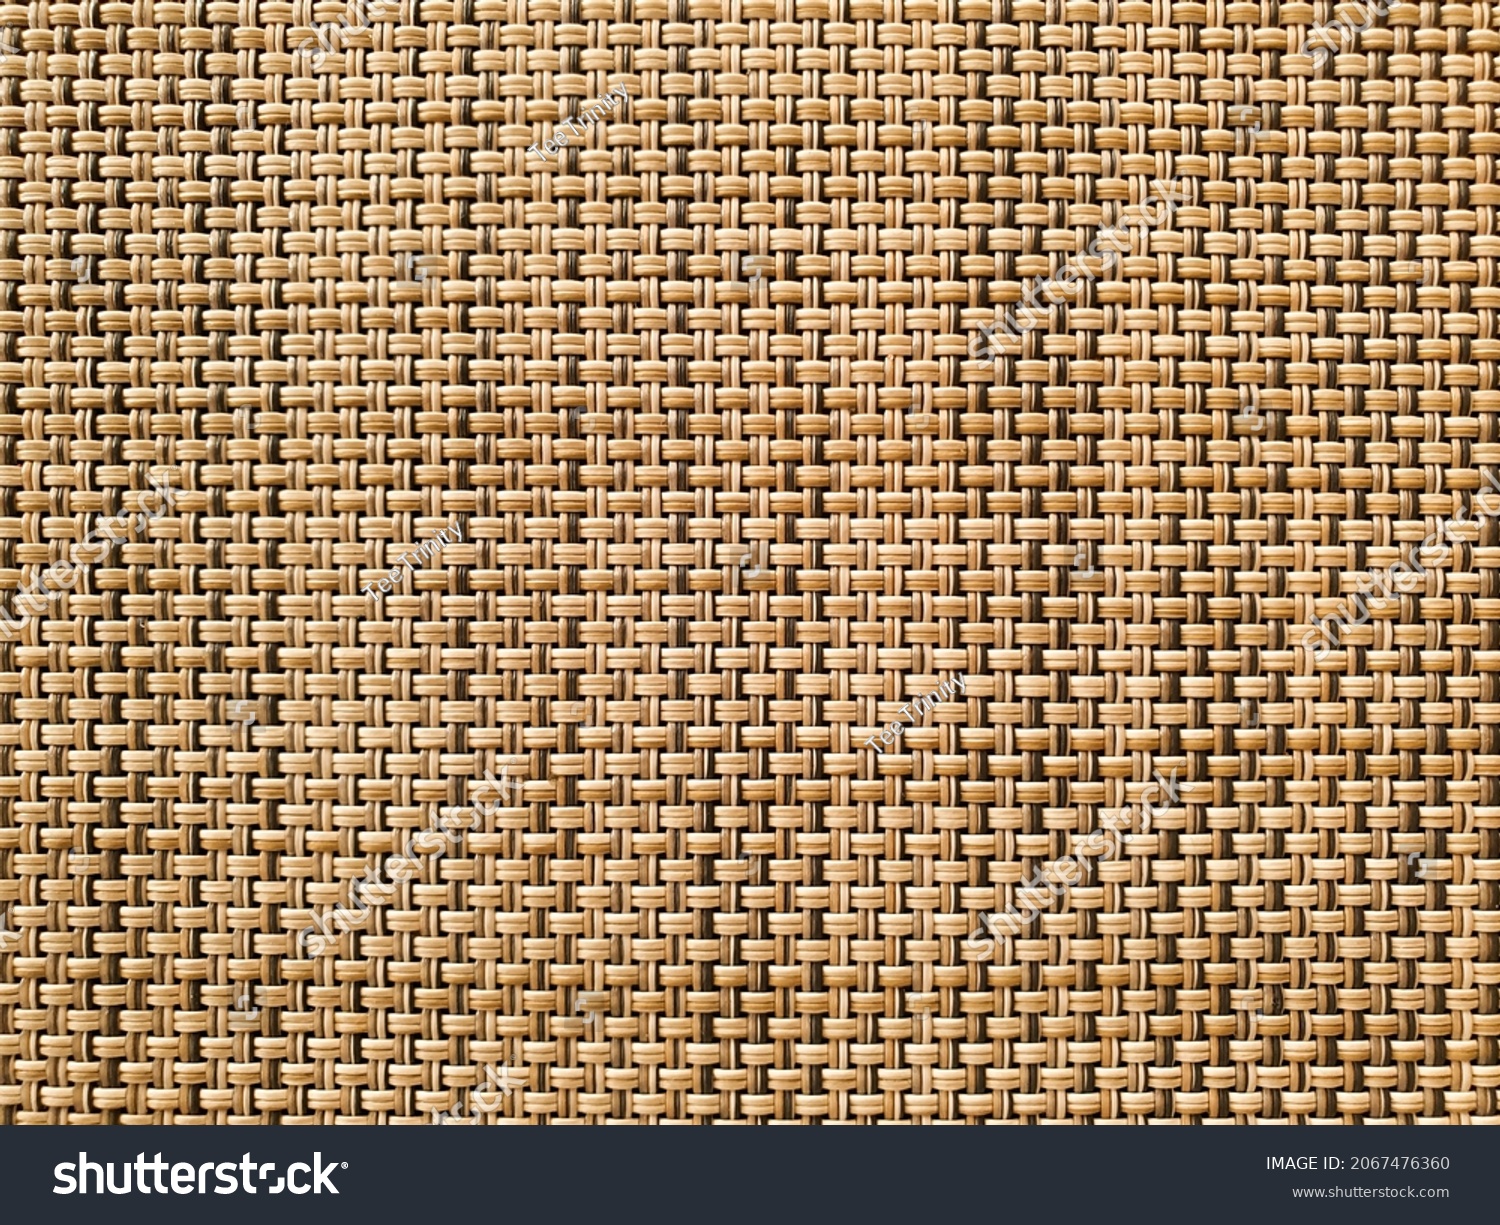 Pattern of wooden twigs constricted together. Wood weaves together forming a mat. Texture of wooden twigs weaved into a structure. Crossing structure of wood.  #2067476360